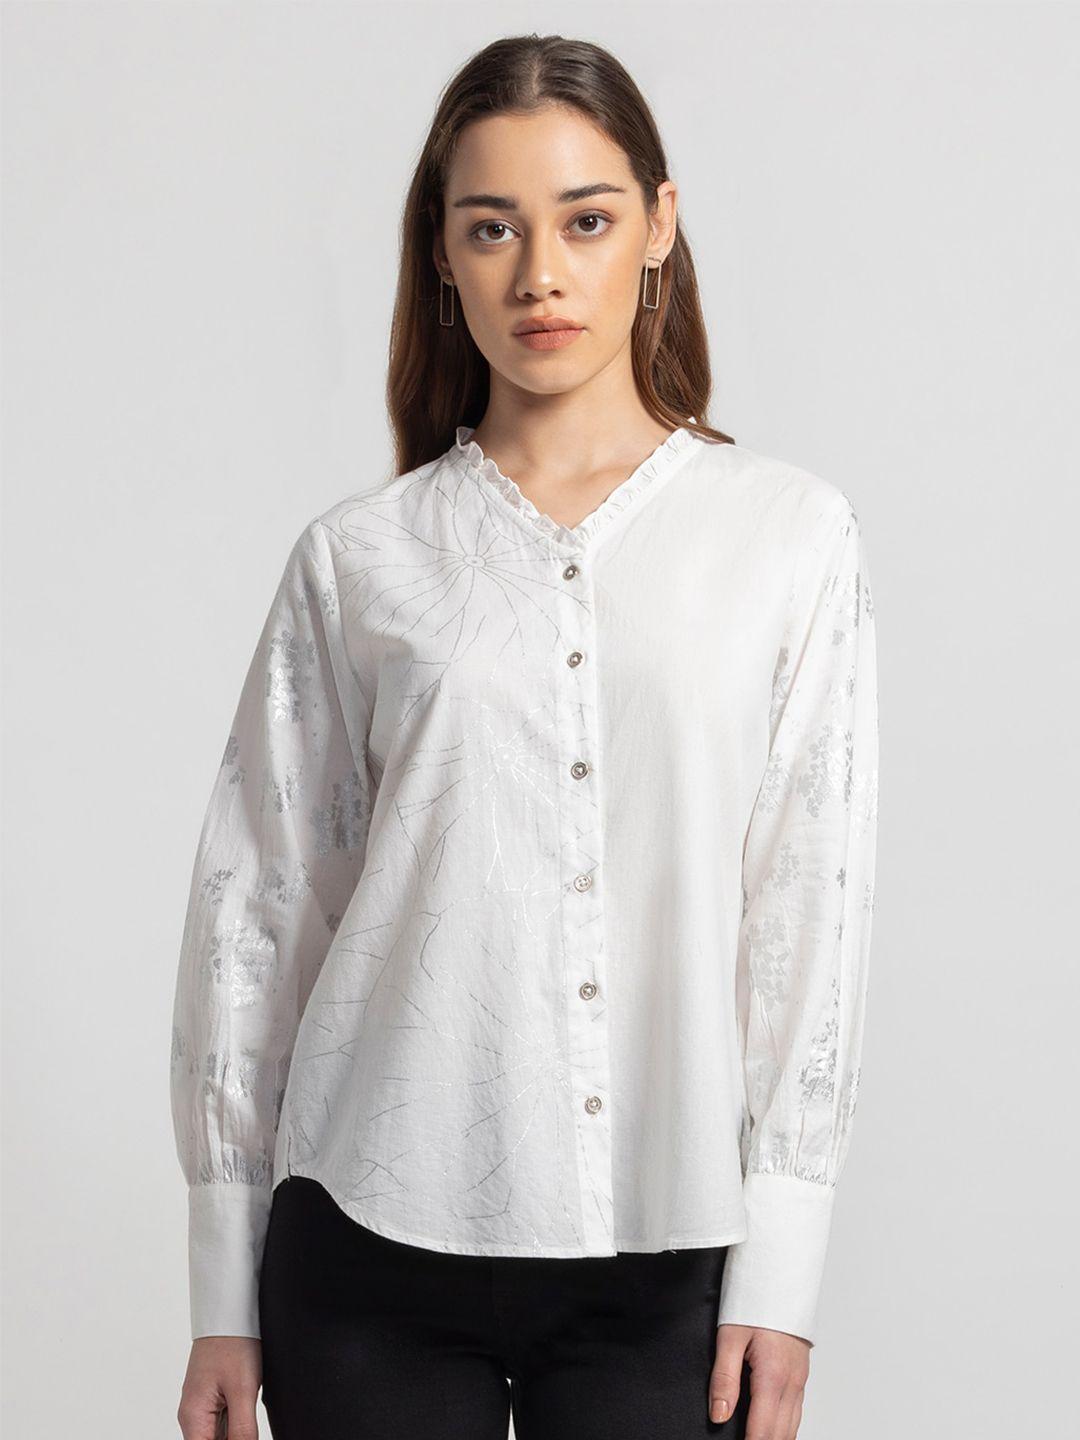 shaye-foil-printed-contemporary-casual-cotton-shirt